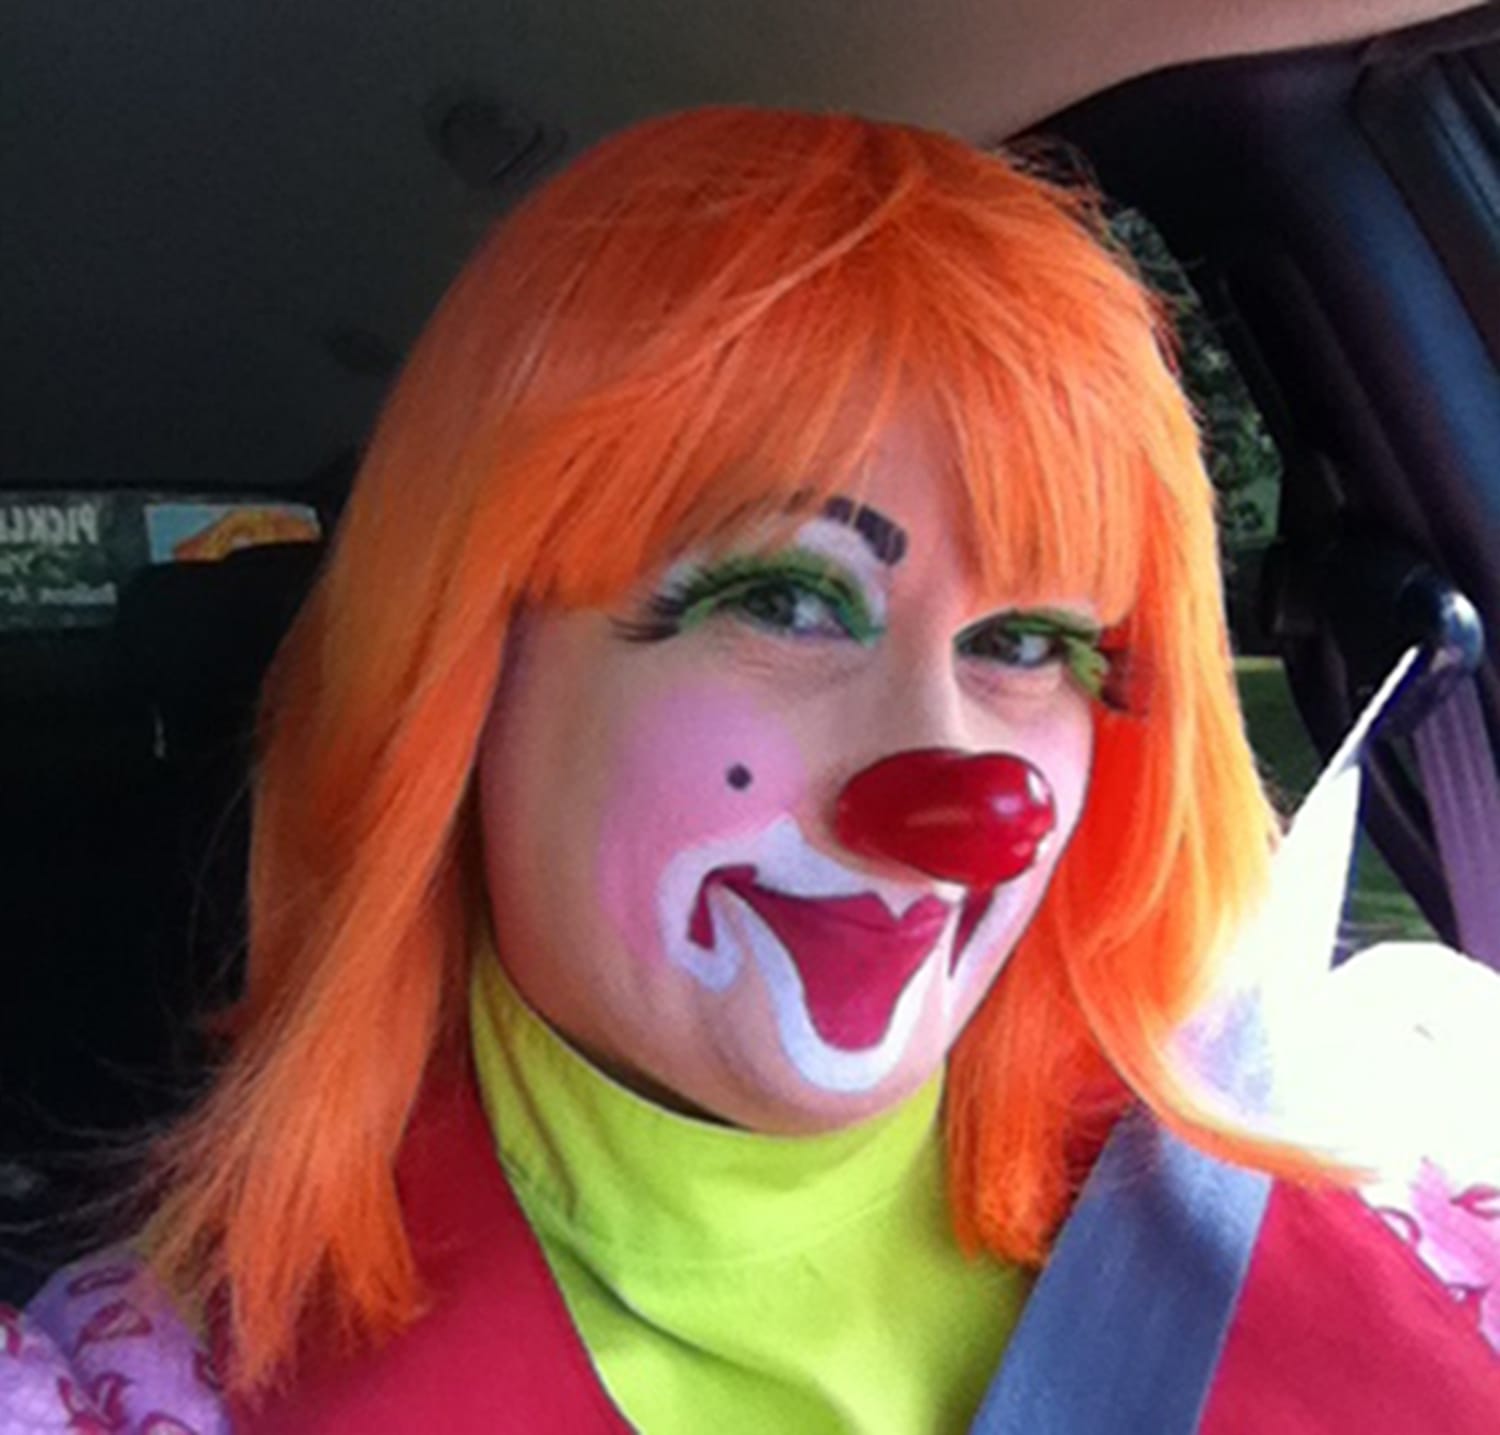 Can you help with my clown look? : r/clowns